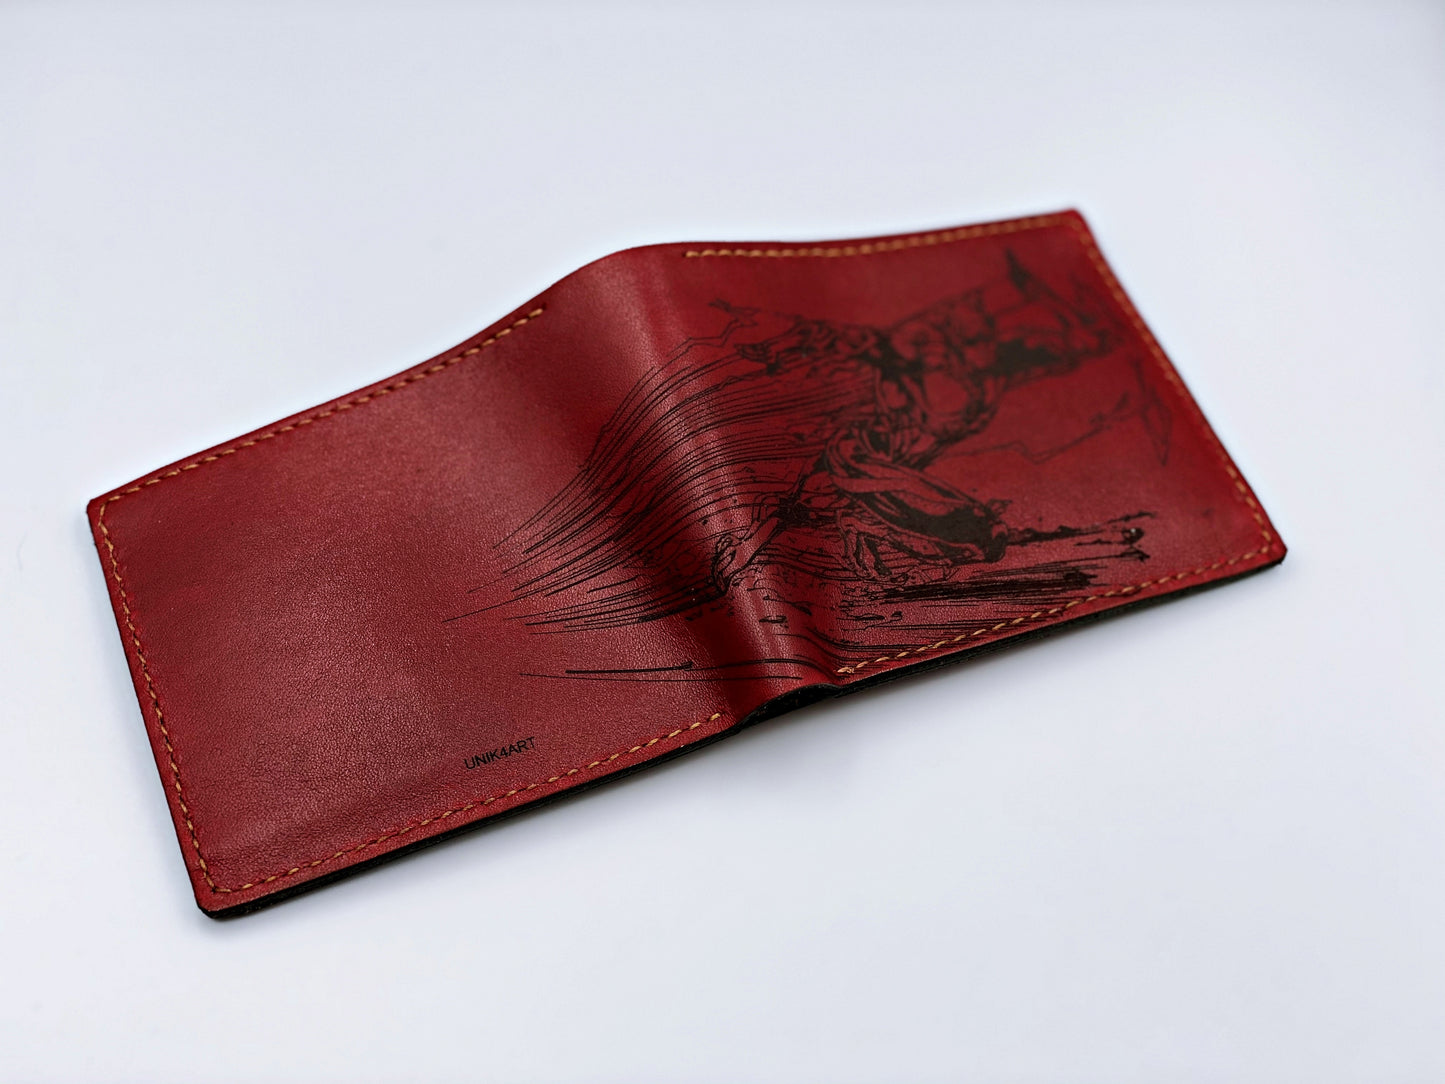 Mayan Corner - Flash Barry Allen DC superheroes leather handmade men's wallet, custom gifts for him, father's day gifts